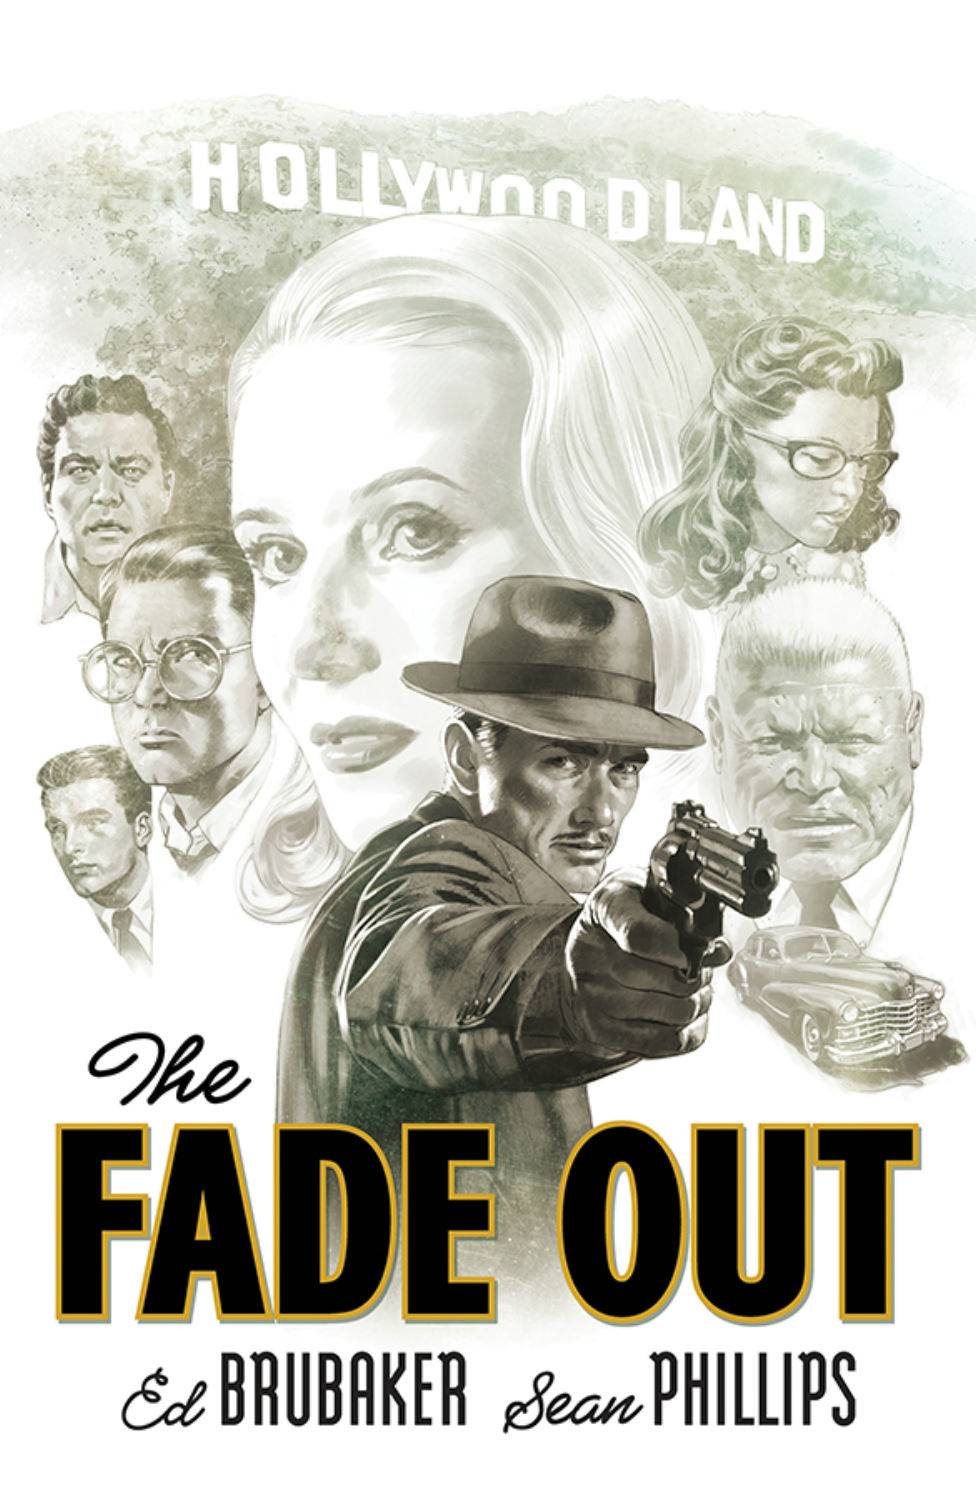 The Fade Out s/c